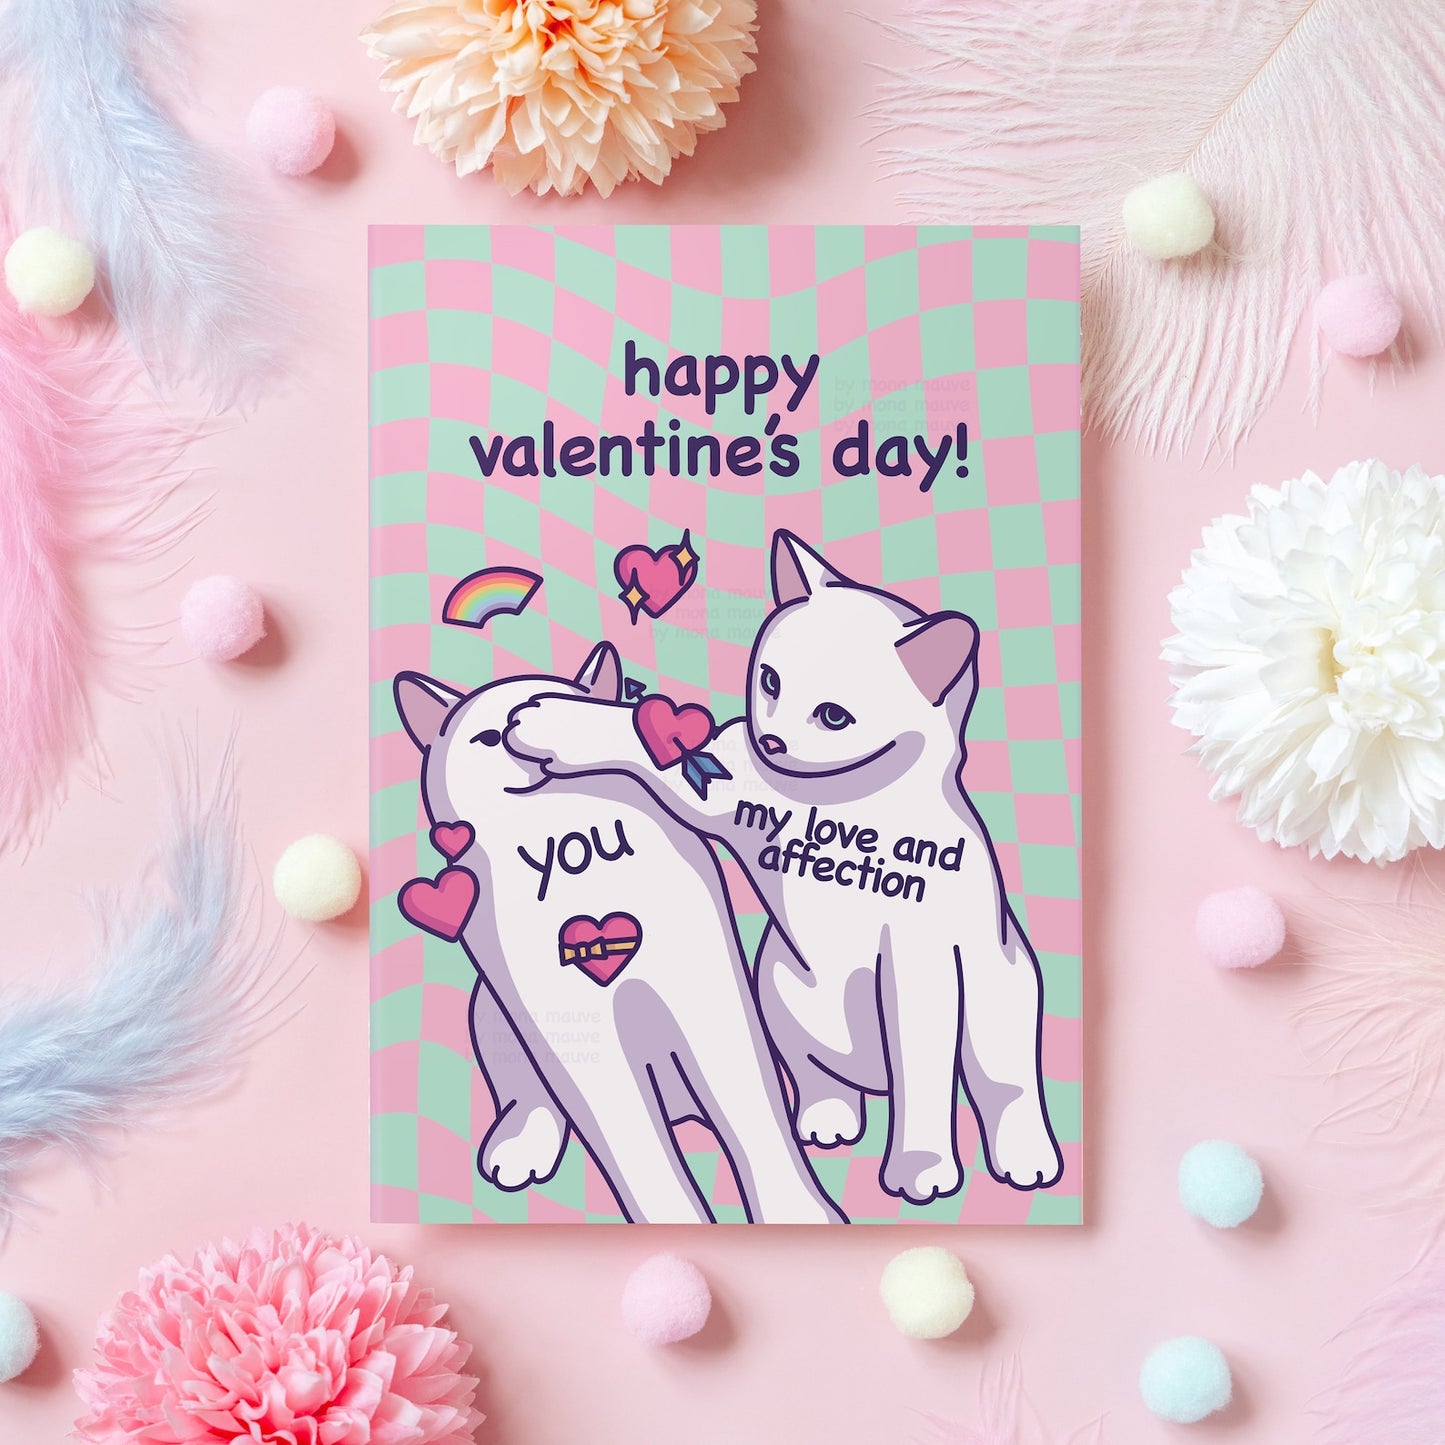 Valentine's Day Card | Cute Cat Meme | Happy Valentine's Day! | For Husband, Wife, Boyfriend, Girlfriend, Partner | Gift for Her or Him